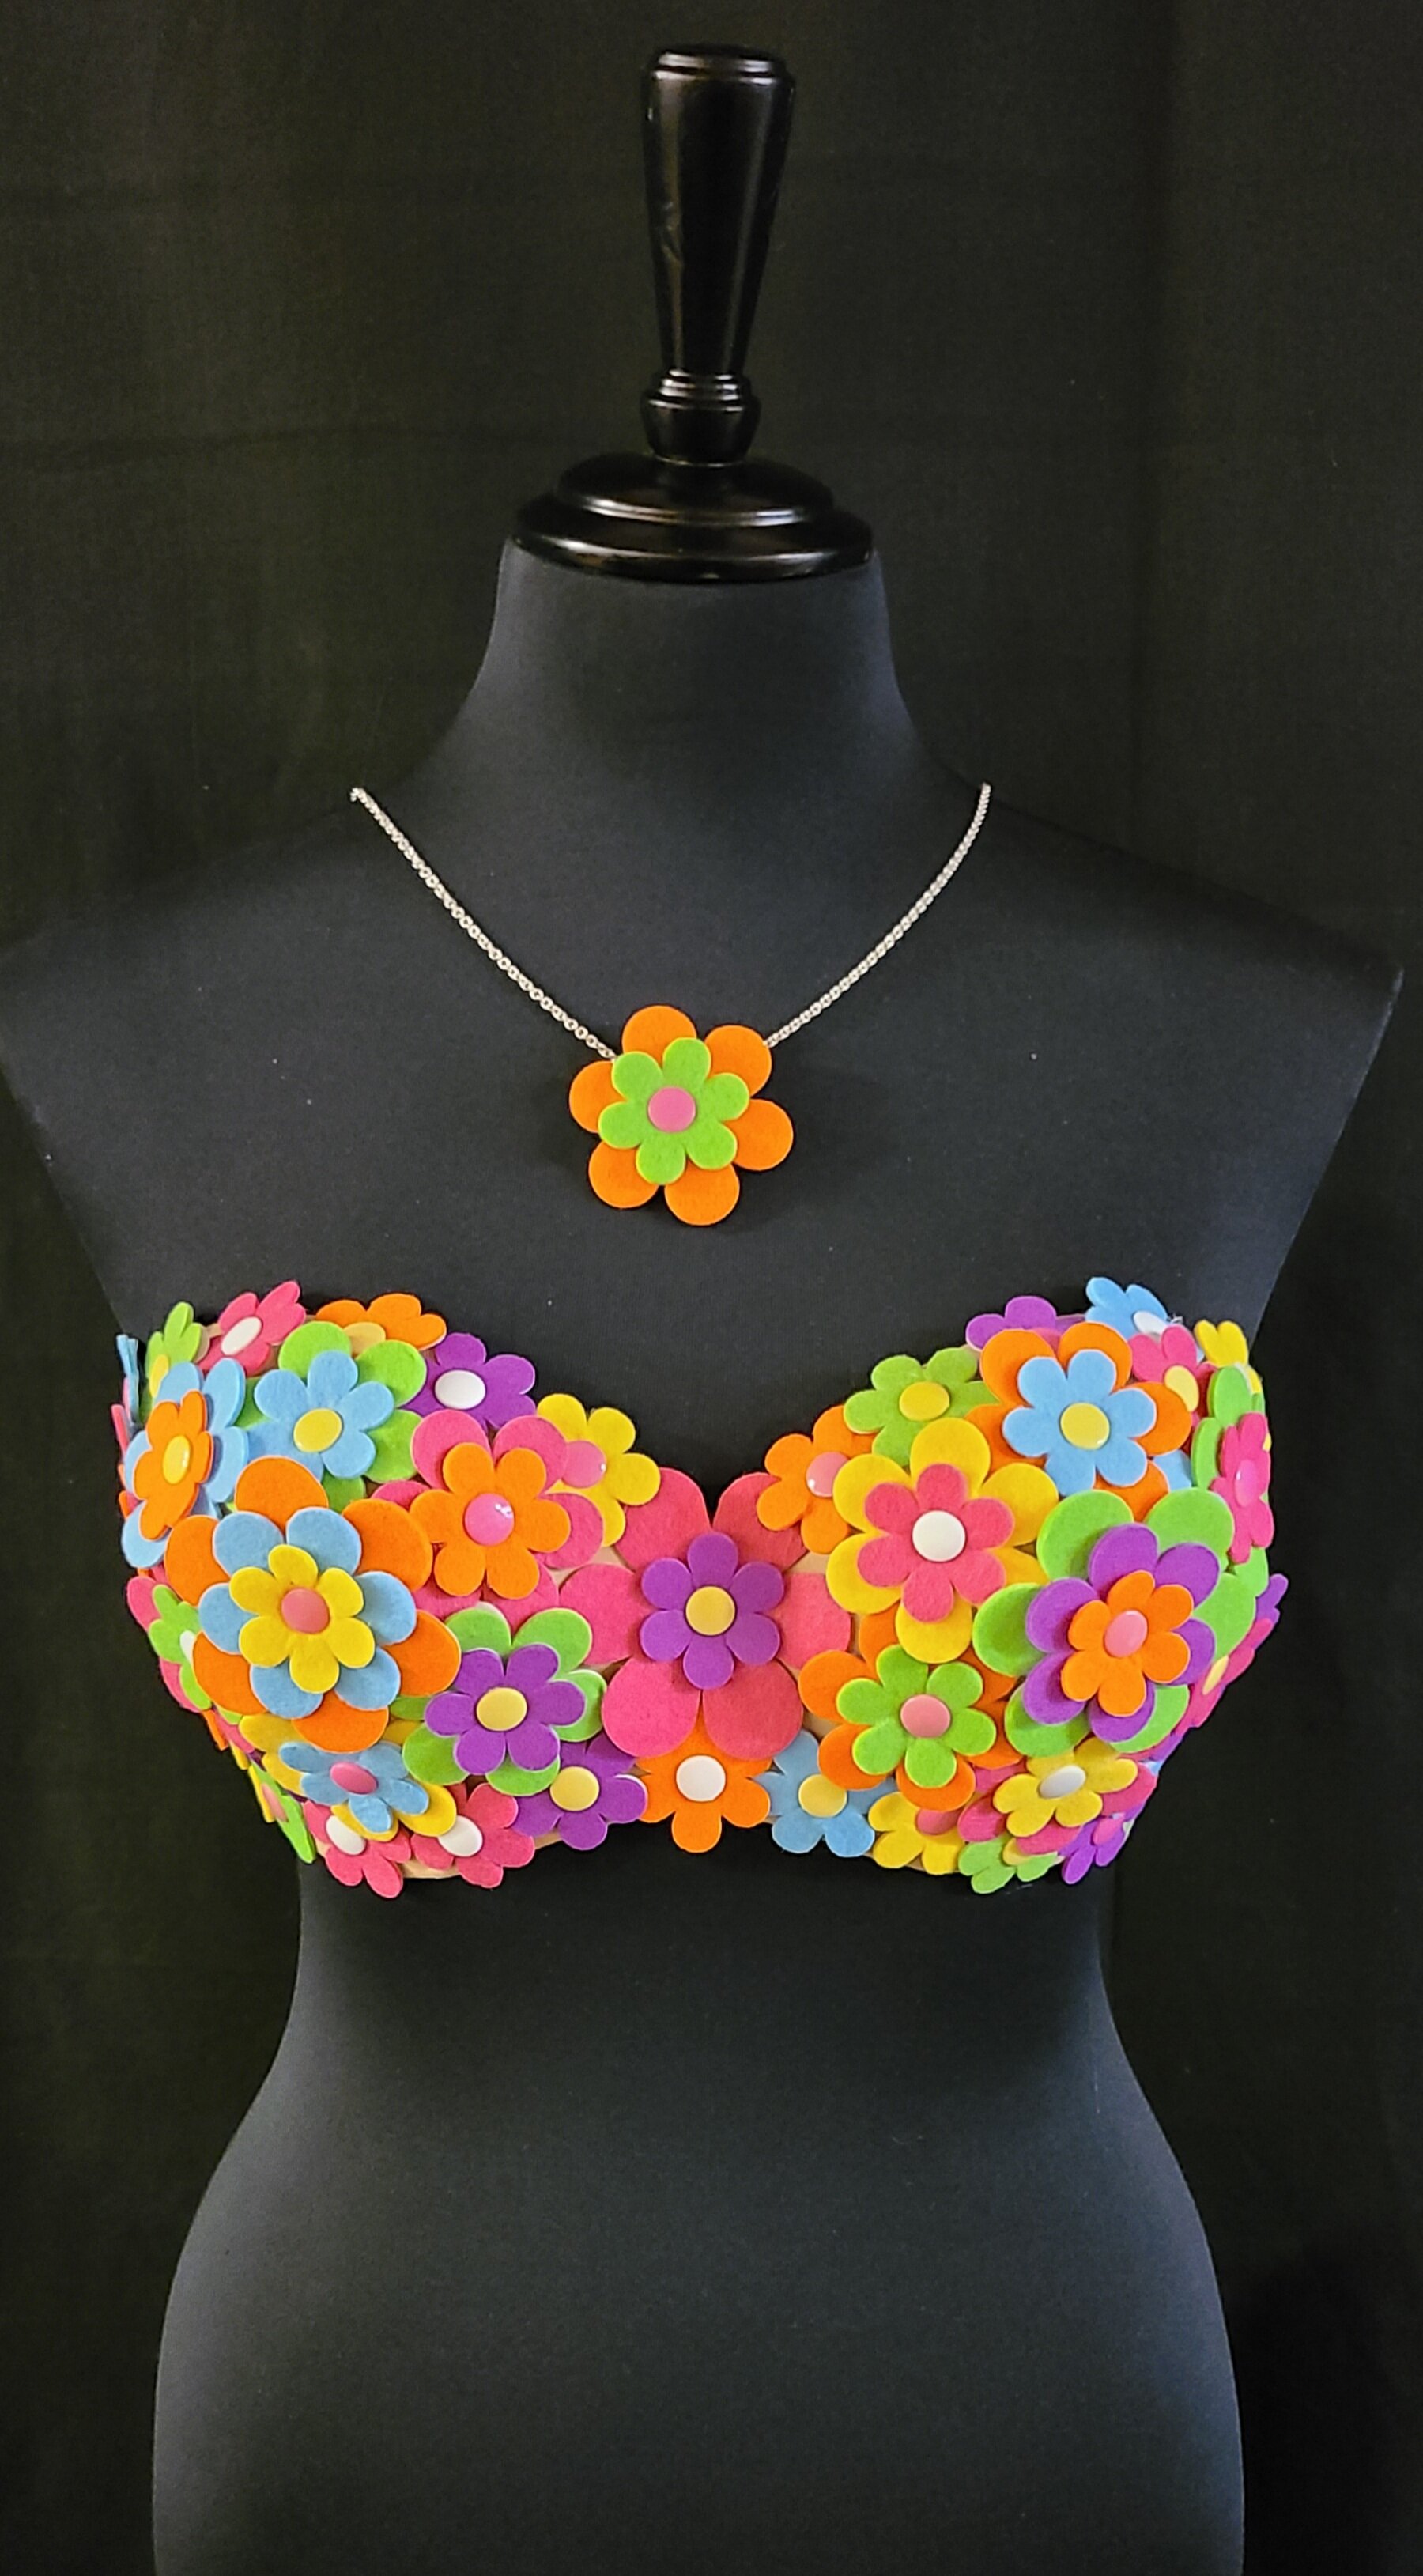 2021 Bra Art Gallery / People's Choice Award Voting — Bras for the